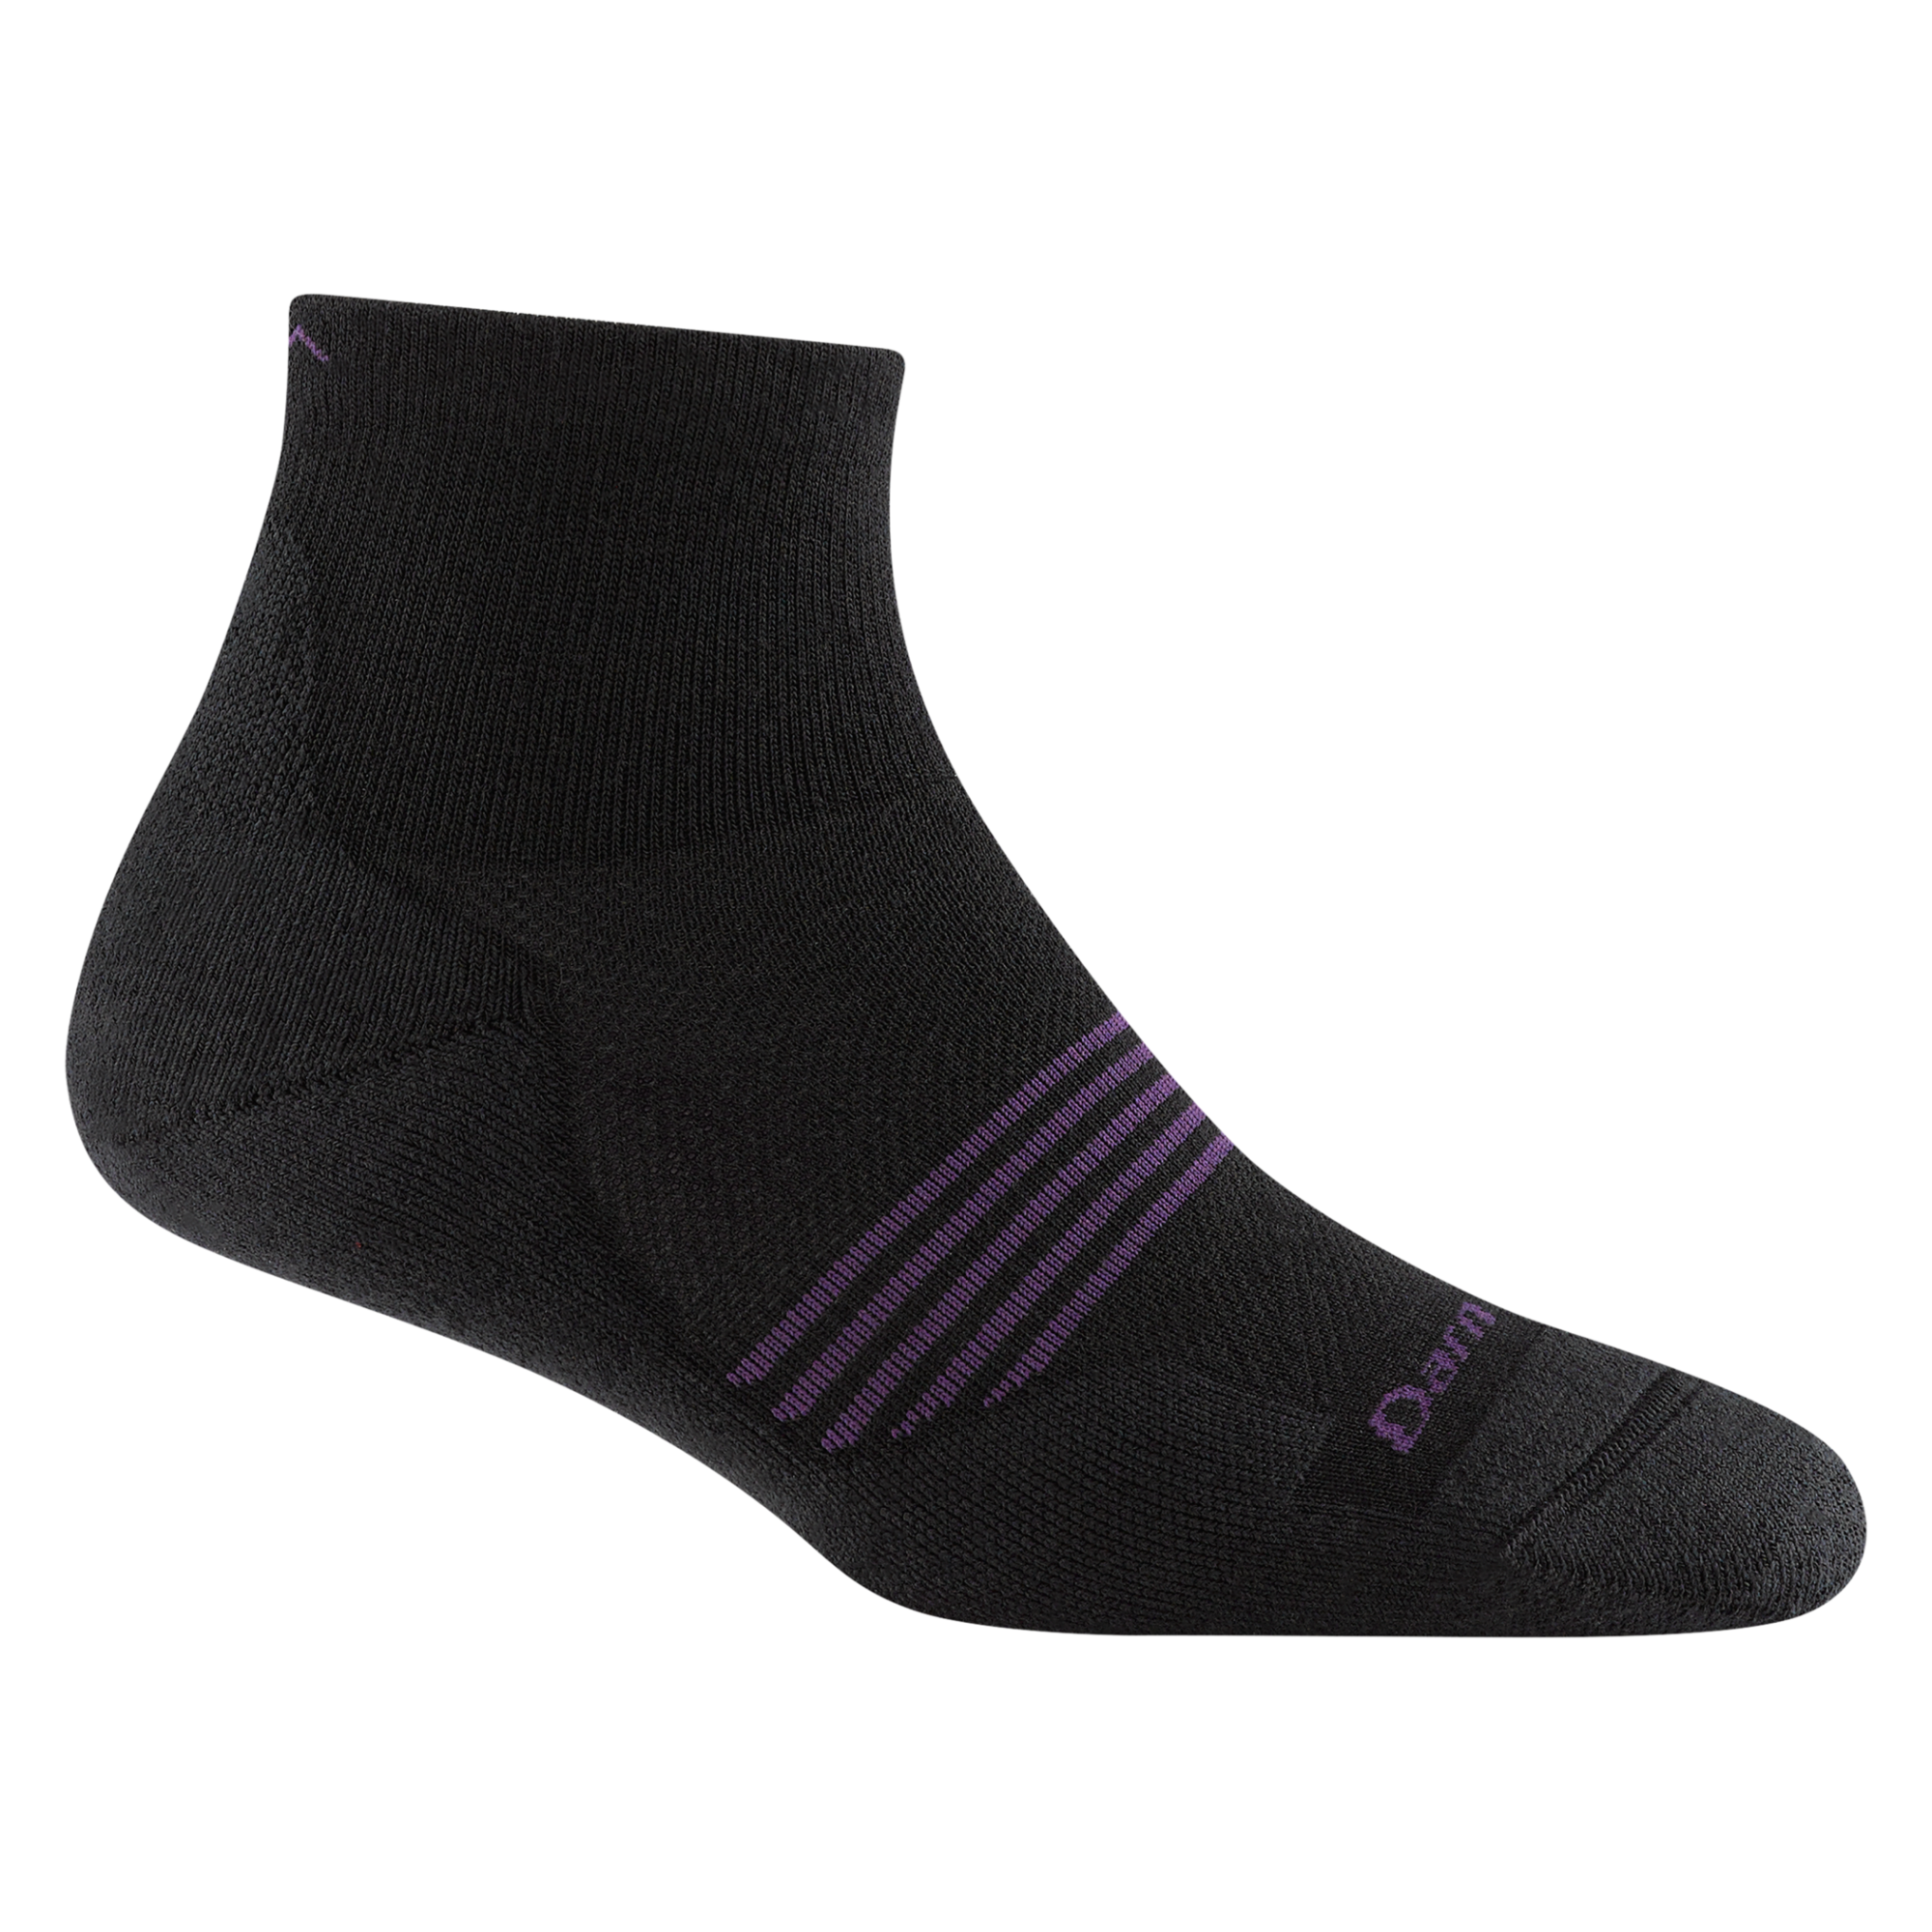 1113 women's element quarter athletic sock in color black with purple forefoot striping and darn tough signature